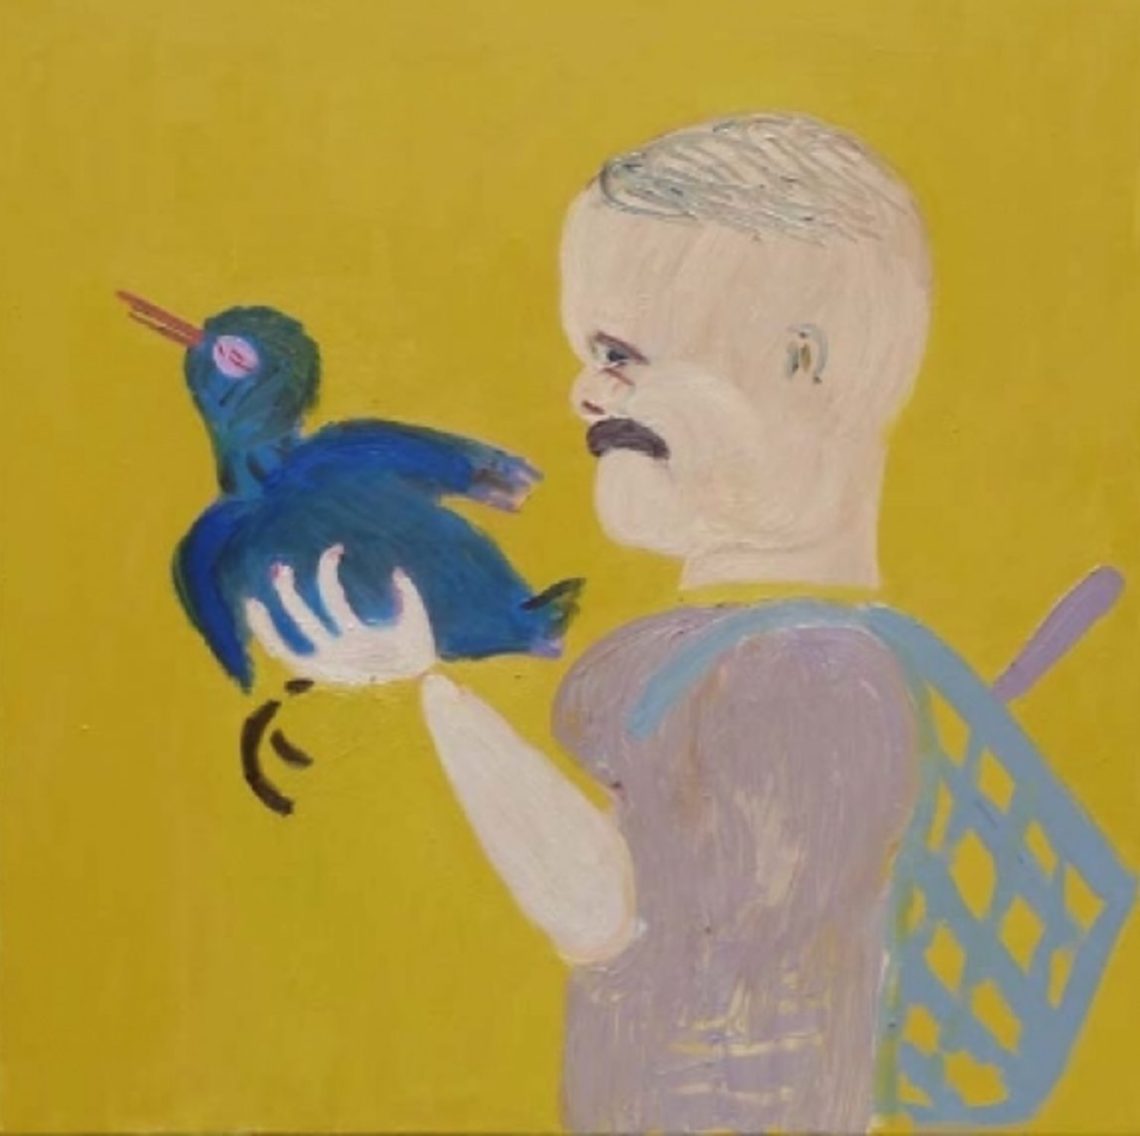 Images shows a painting of a man holding a dark bird against a yellow background